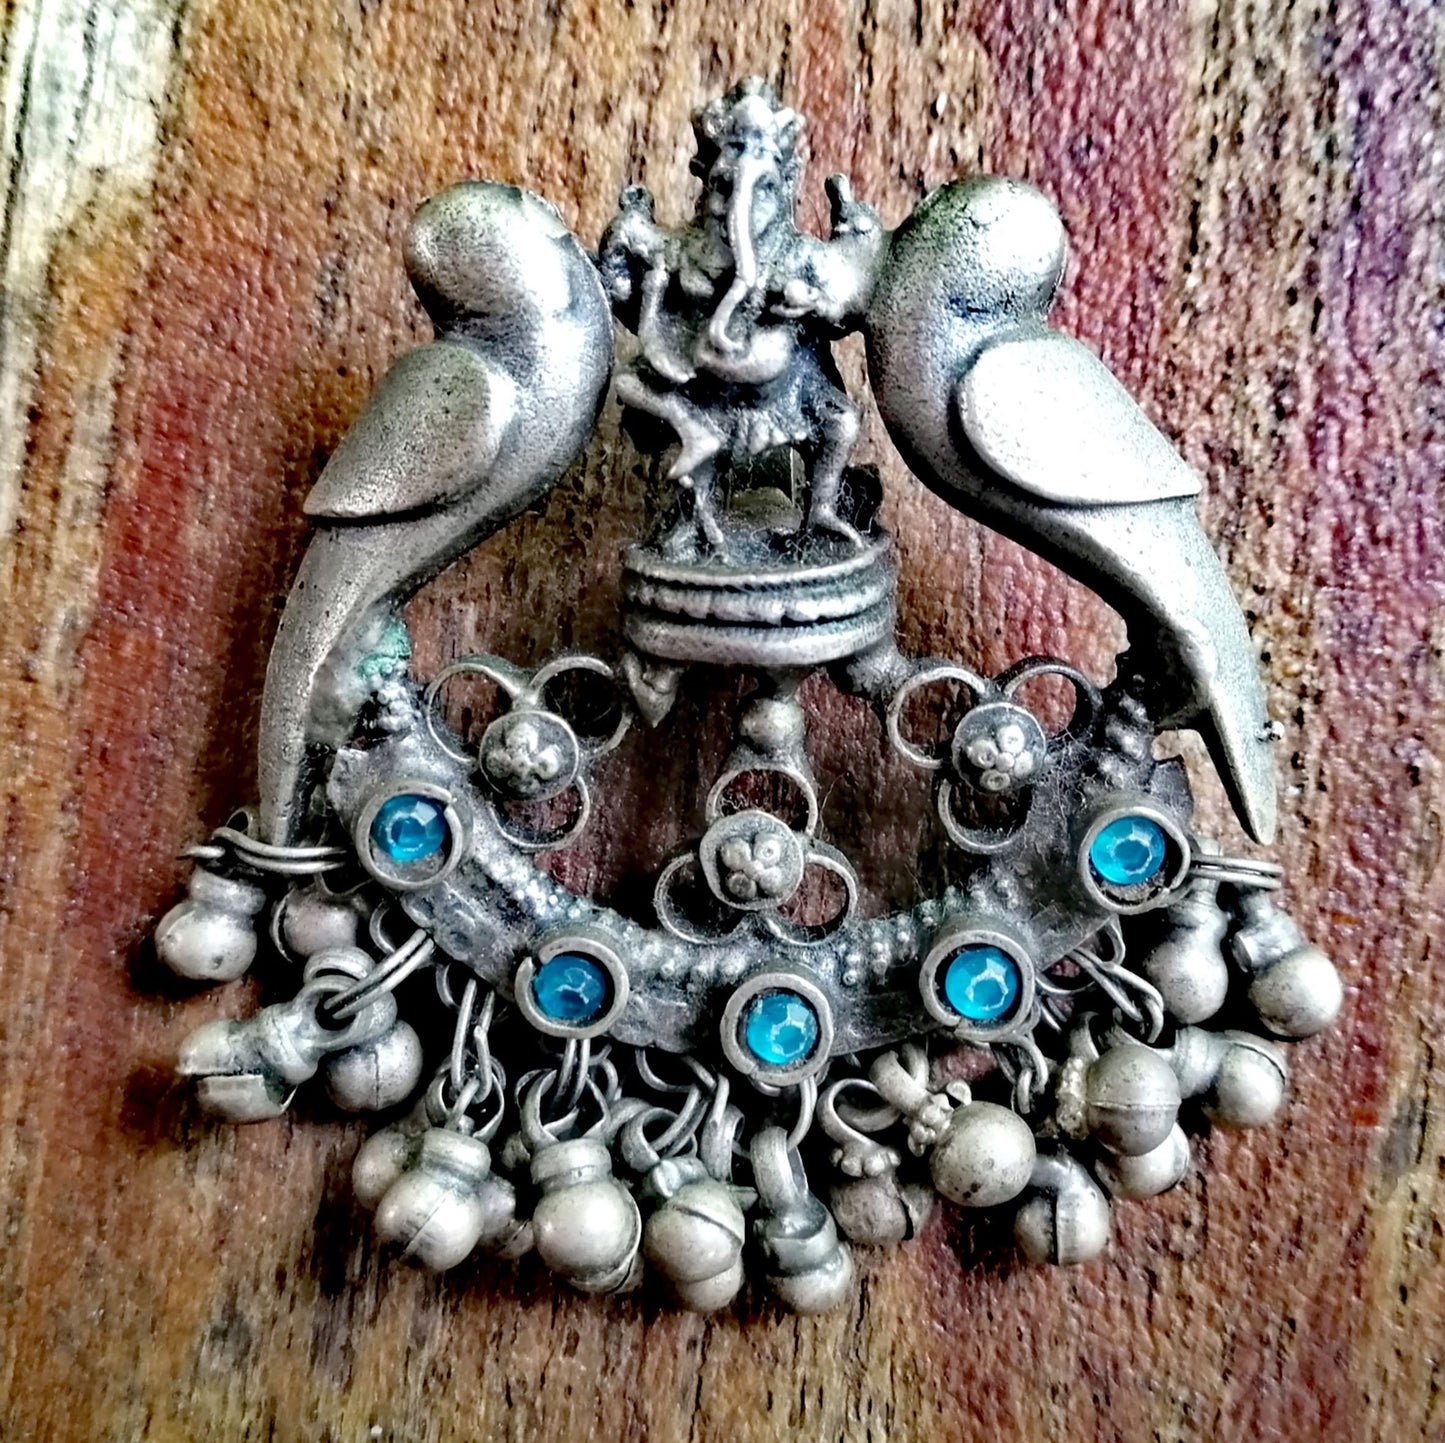 AMAZING Ganesh with 2 Birds Jingle Charm - Sky Blue Sea Glass accents - Overcome Obstacles | New Beginnings